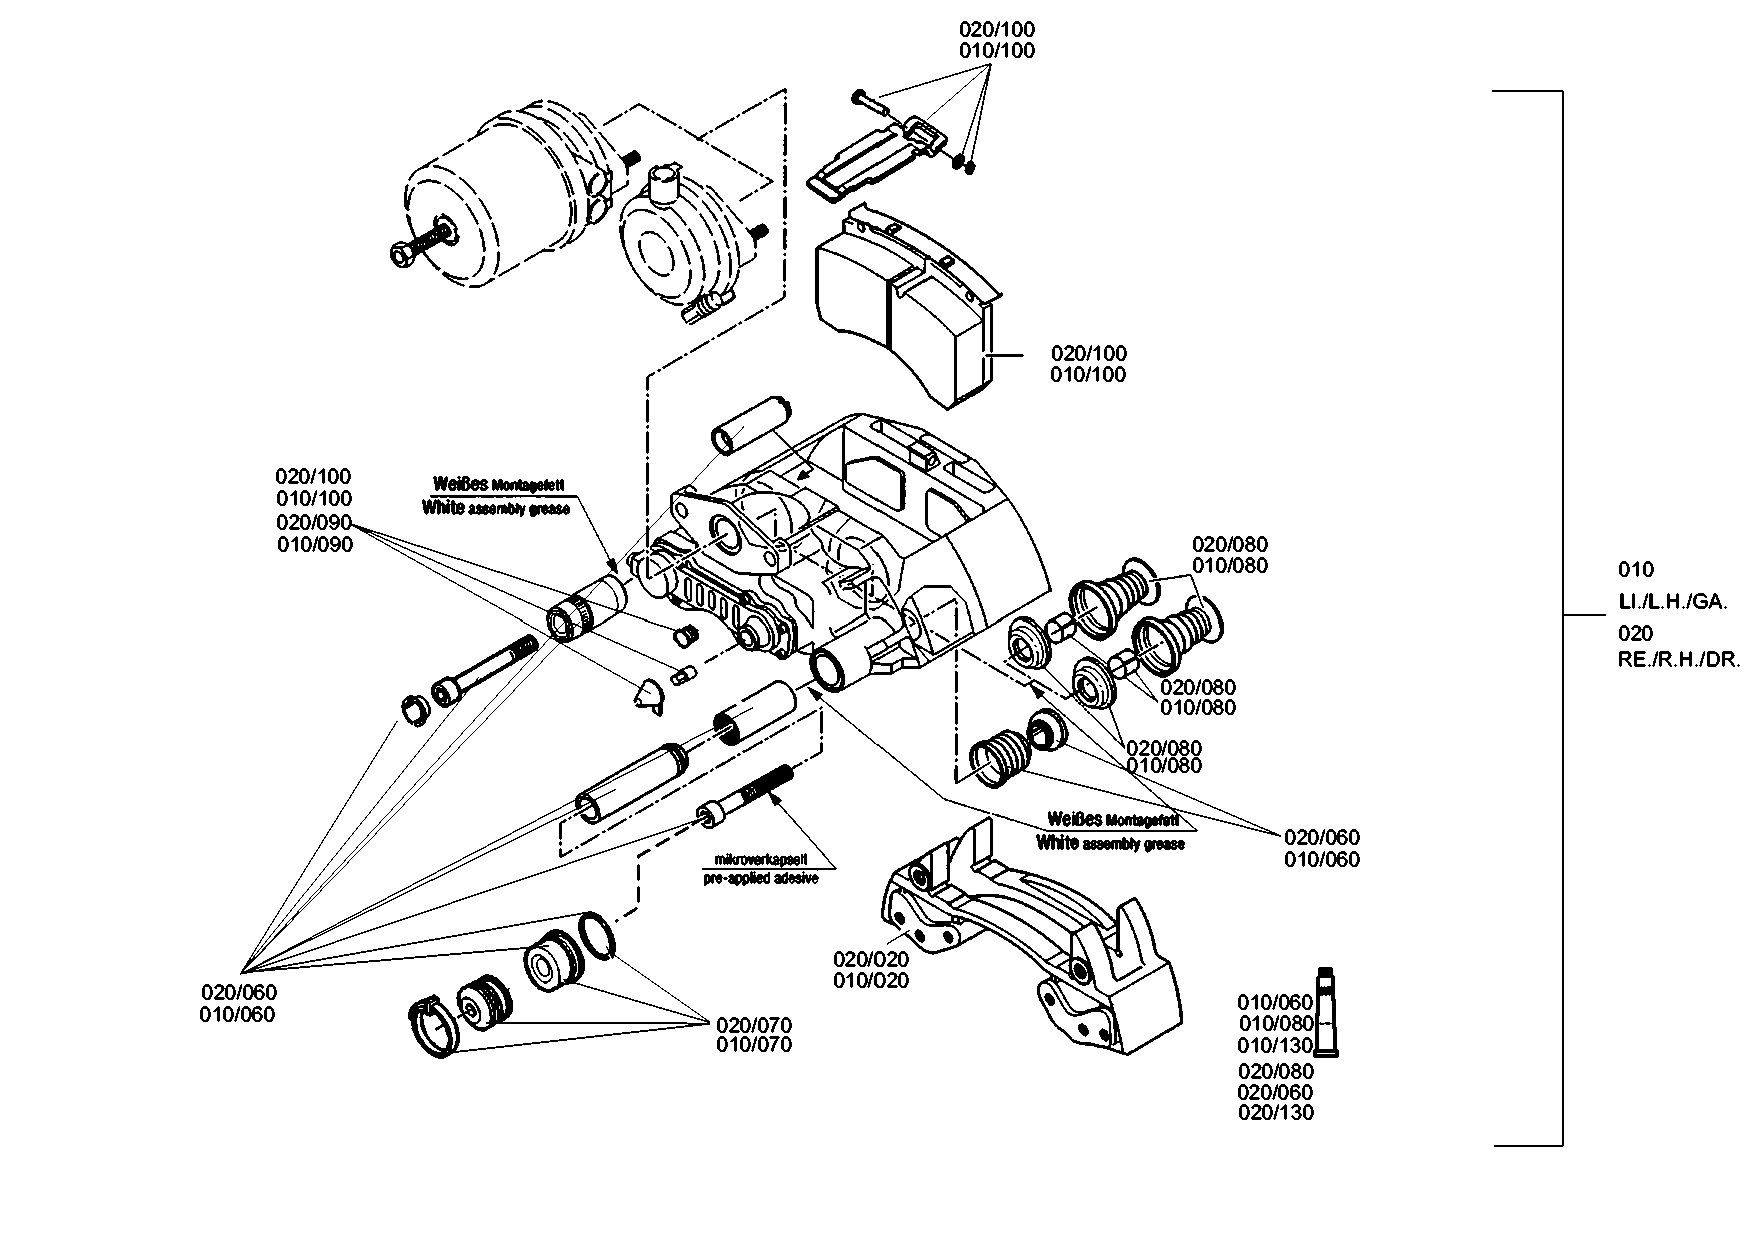 drawing for MAN N1.01101-4214 - REVOLUTION COUNTER (figure 3)